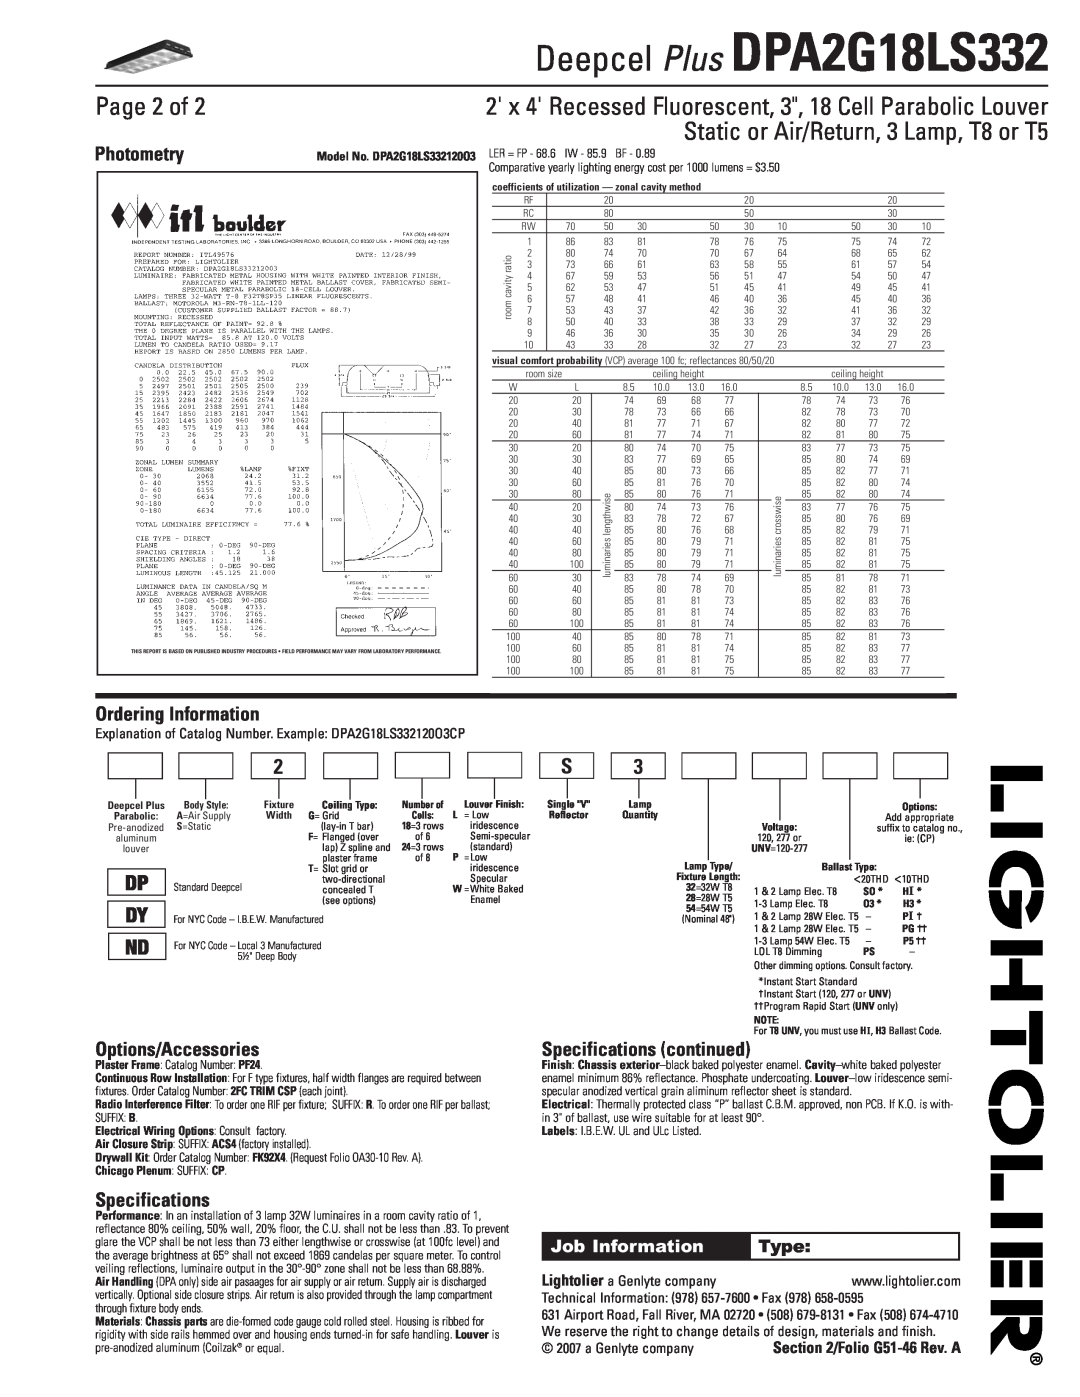 Lightolier DPA2G18LS332 Page 2 of, Photometry, Ordering Information, Options/Accessories, Specifications continued, Type 